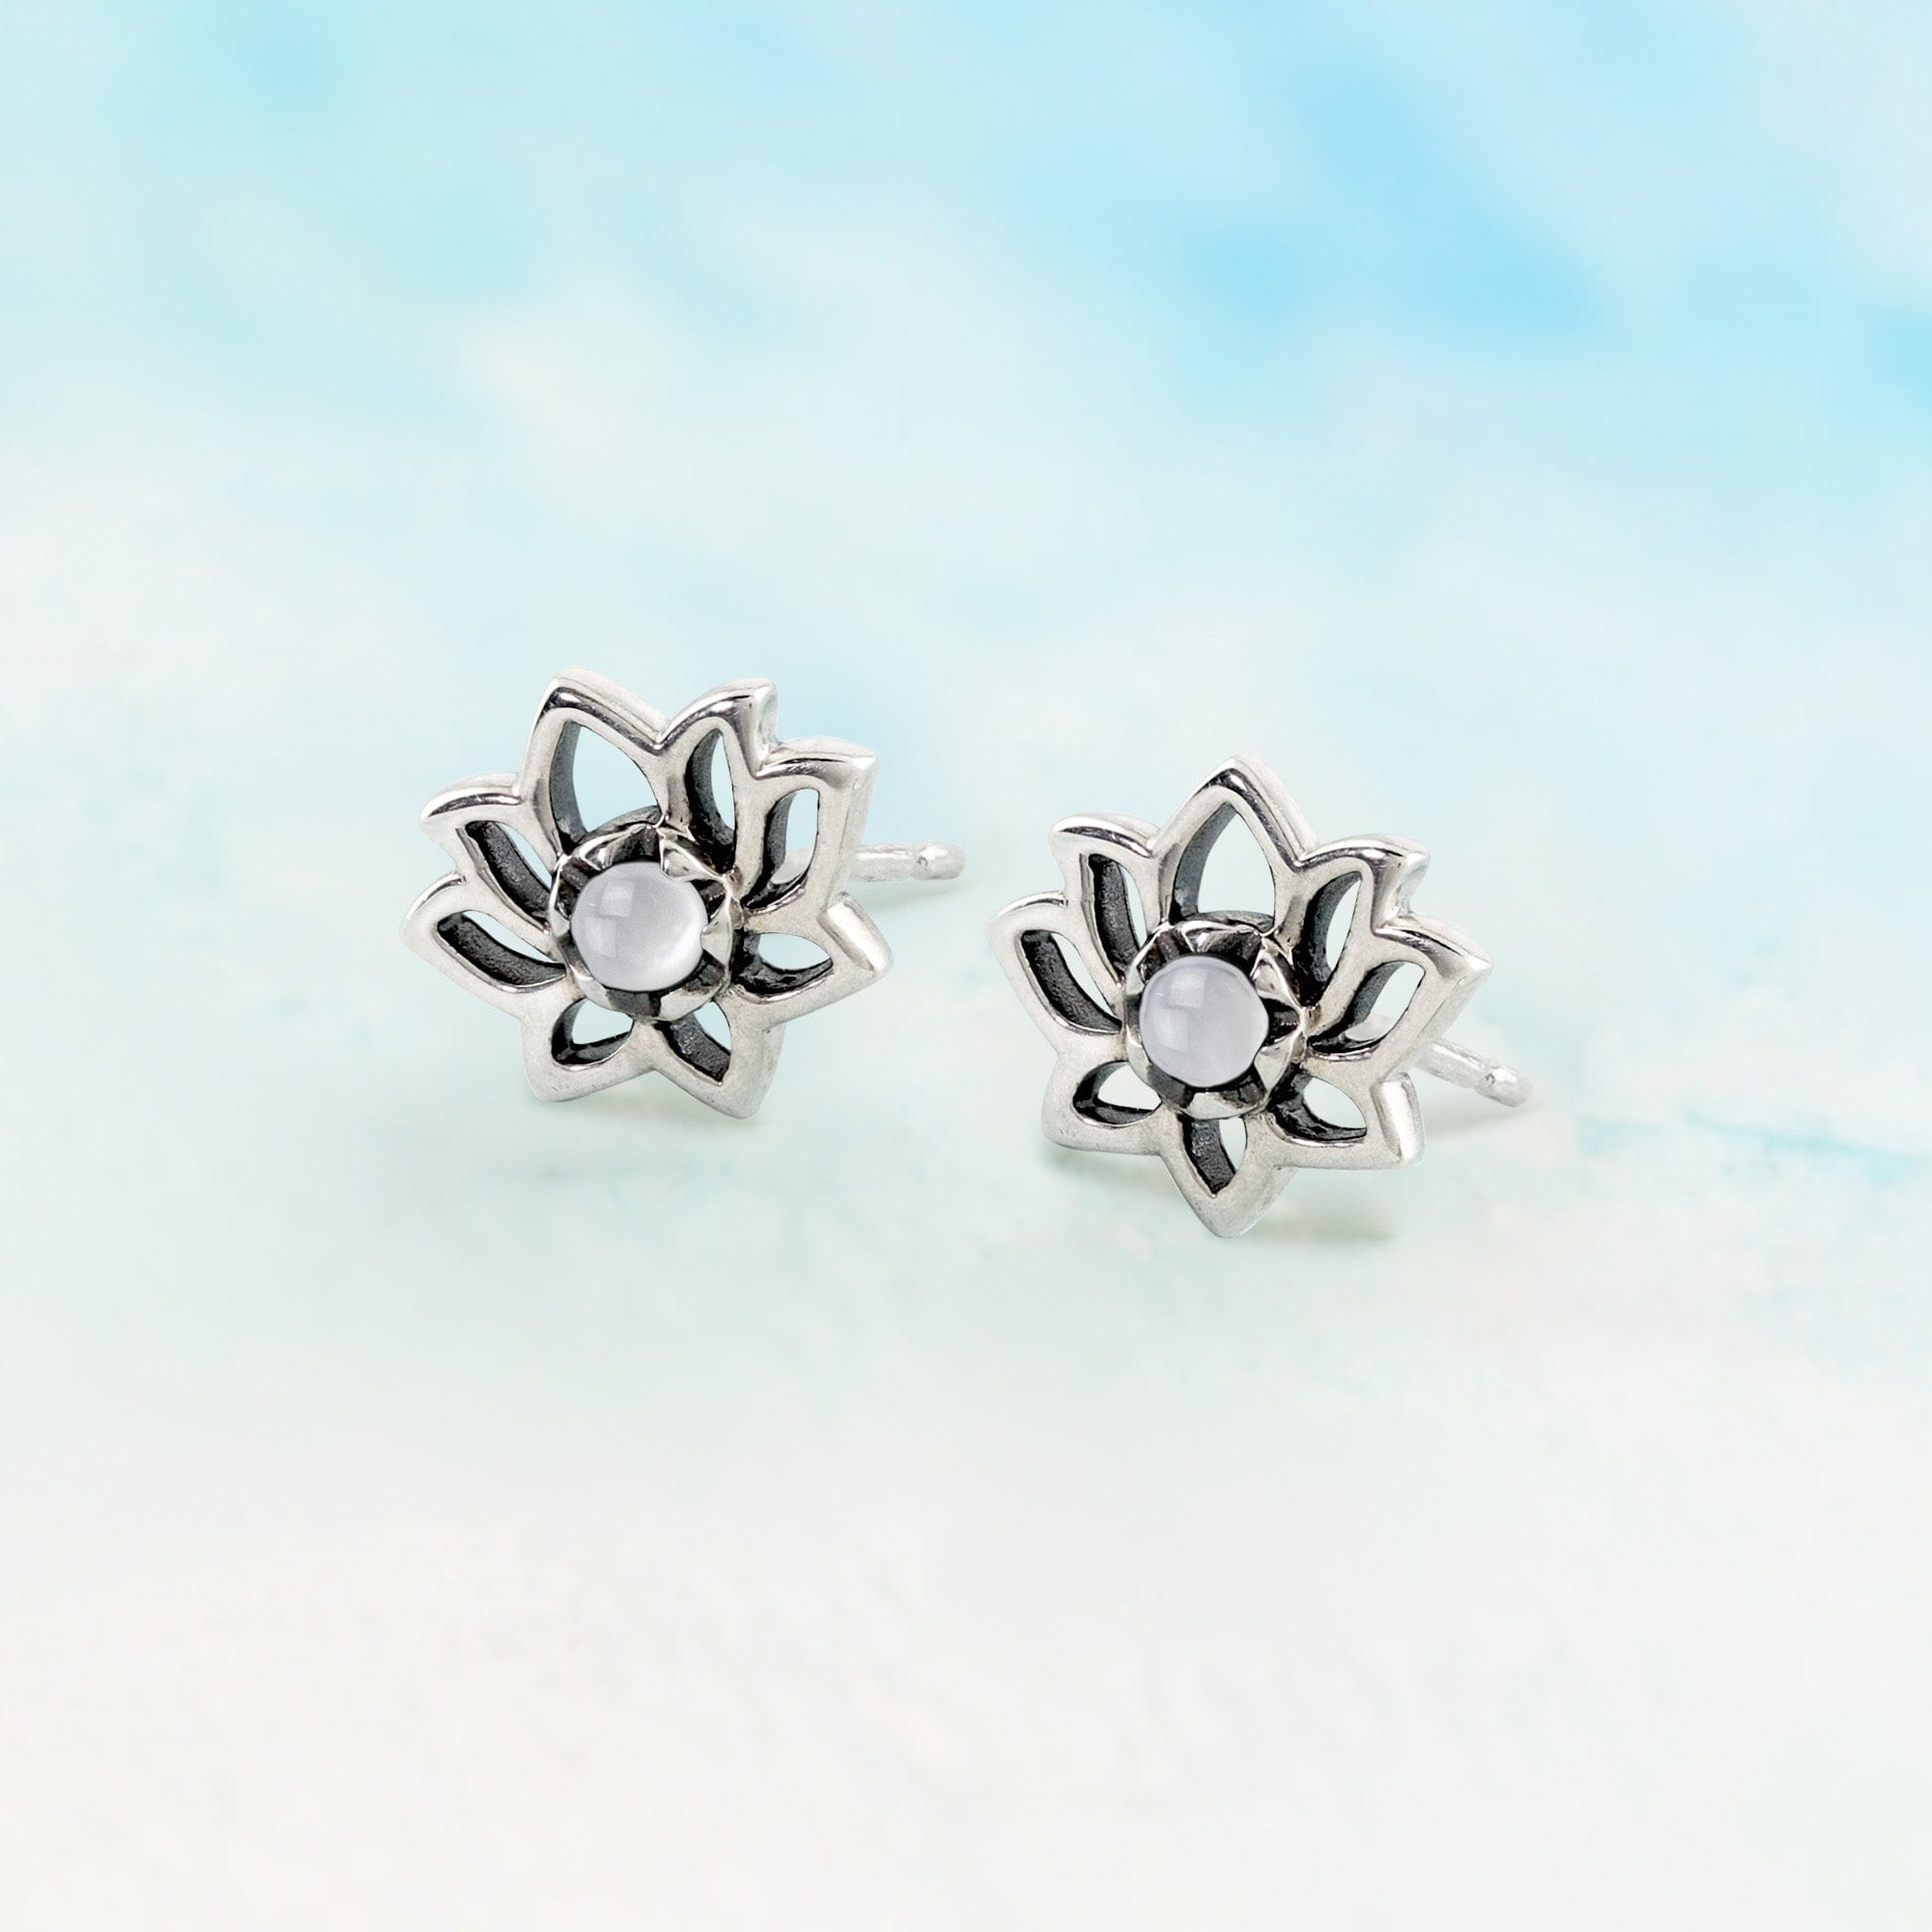 Boma Jewelry Earrings Lotus Studs with Stone